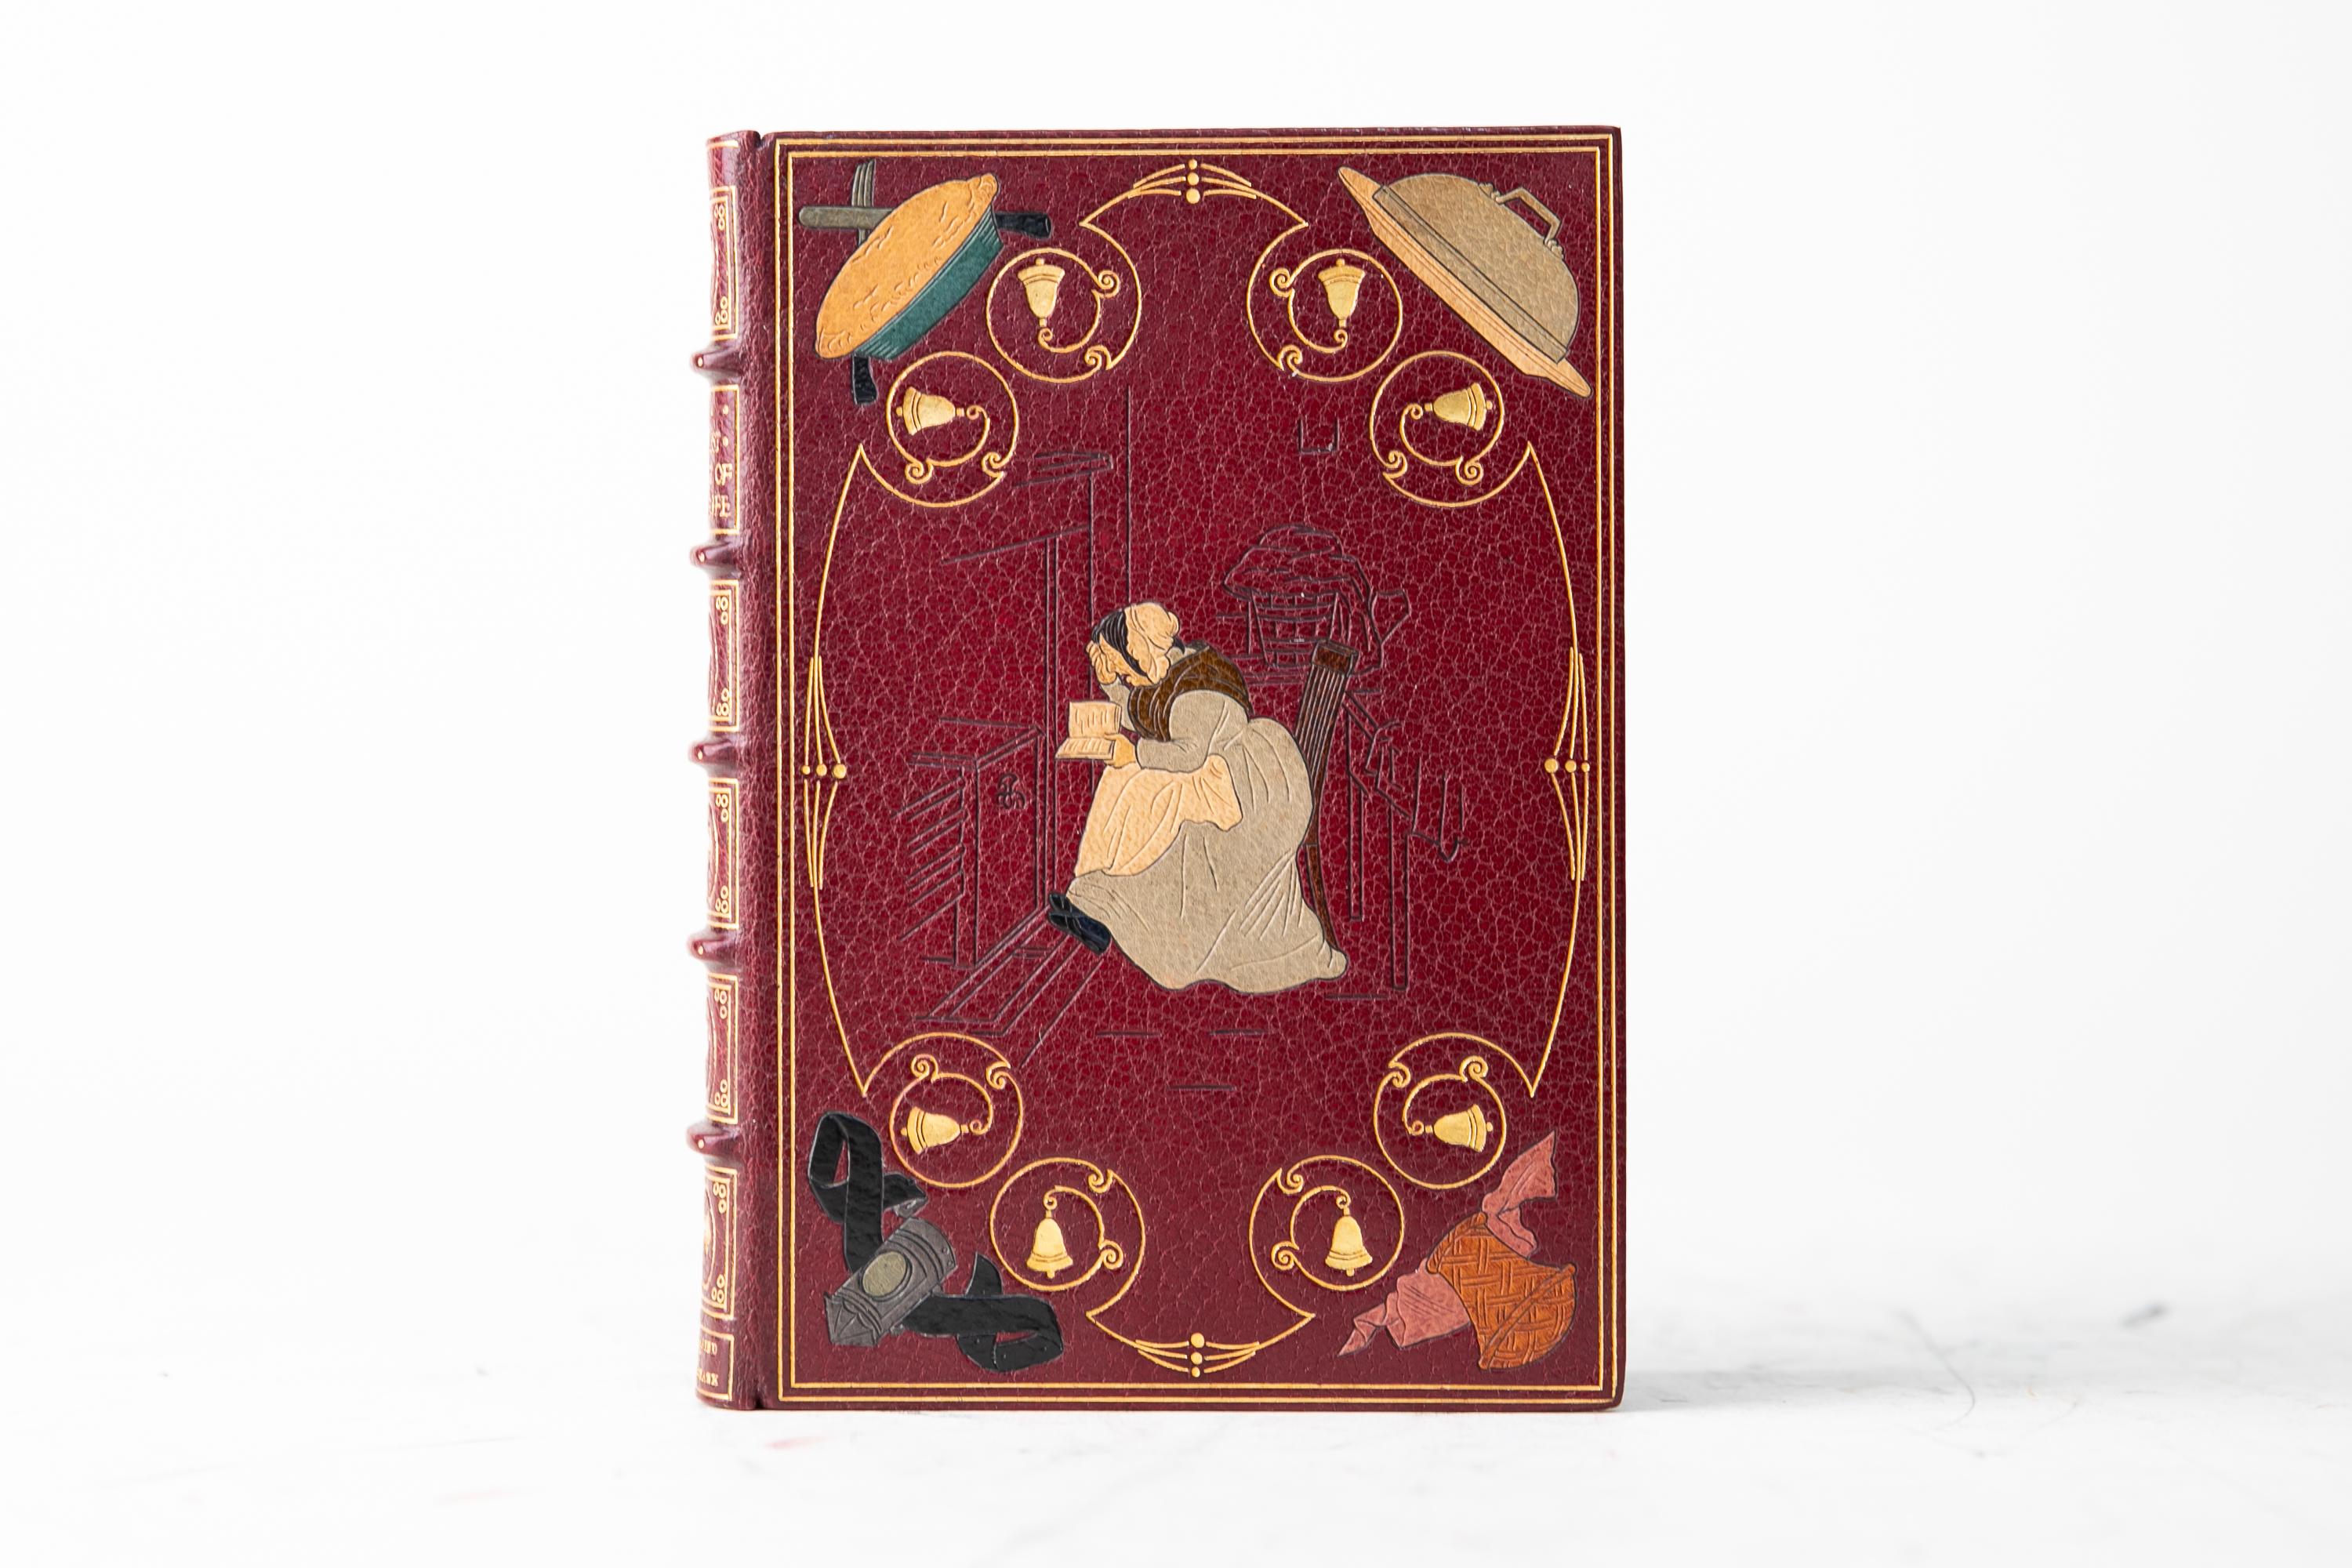 1 Volume. (Anon) The Greatest Plague of Life or The Adventures of a Lady in Search of a Good Servant. Bound by Kelliegram in full wine morocco with multi-colored inlay on the covers. Raised band spine with gilt-tooled detailing. All edges gilt silk